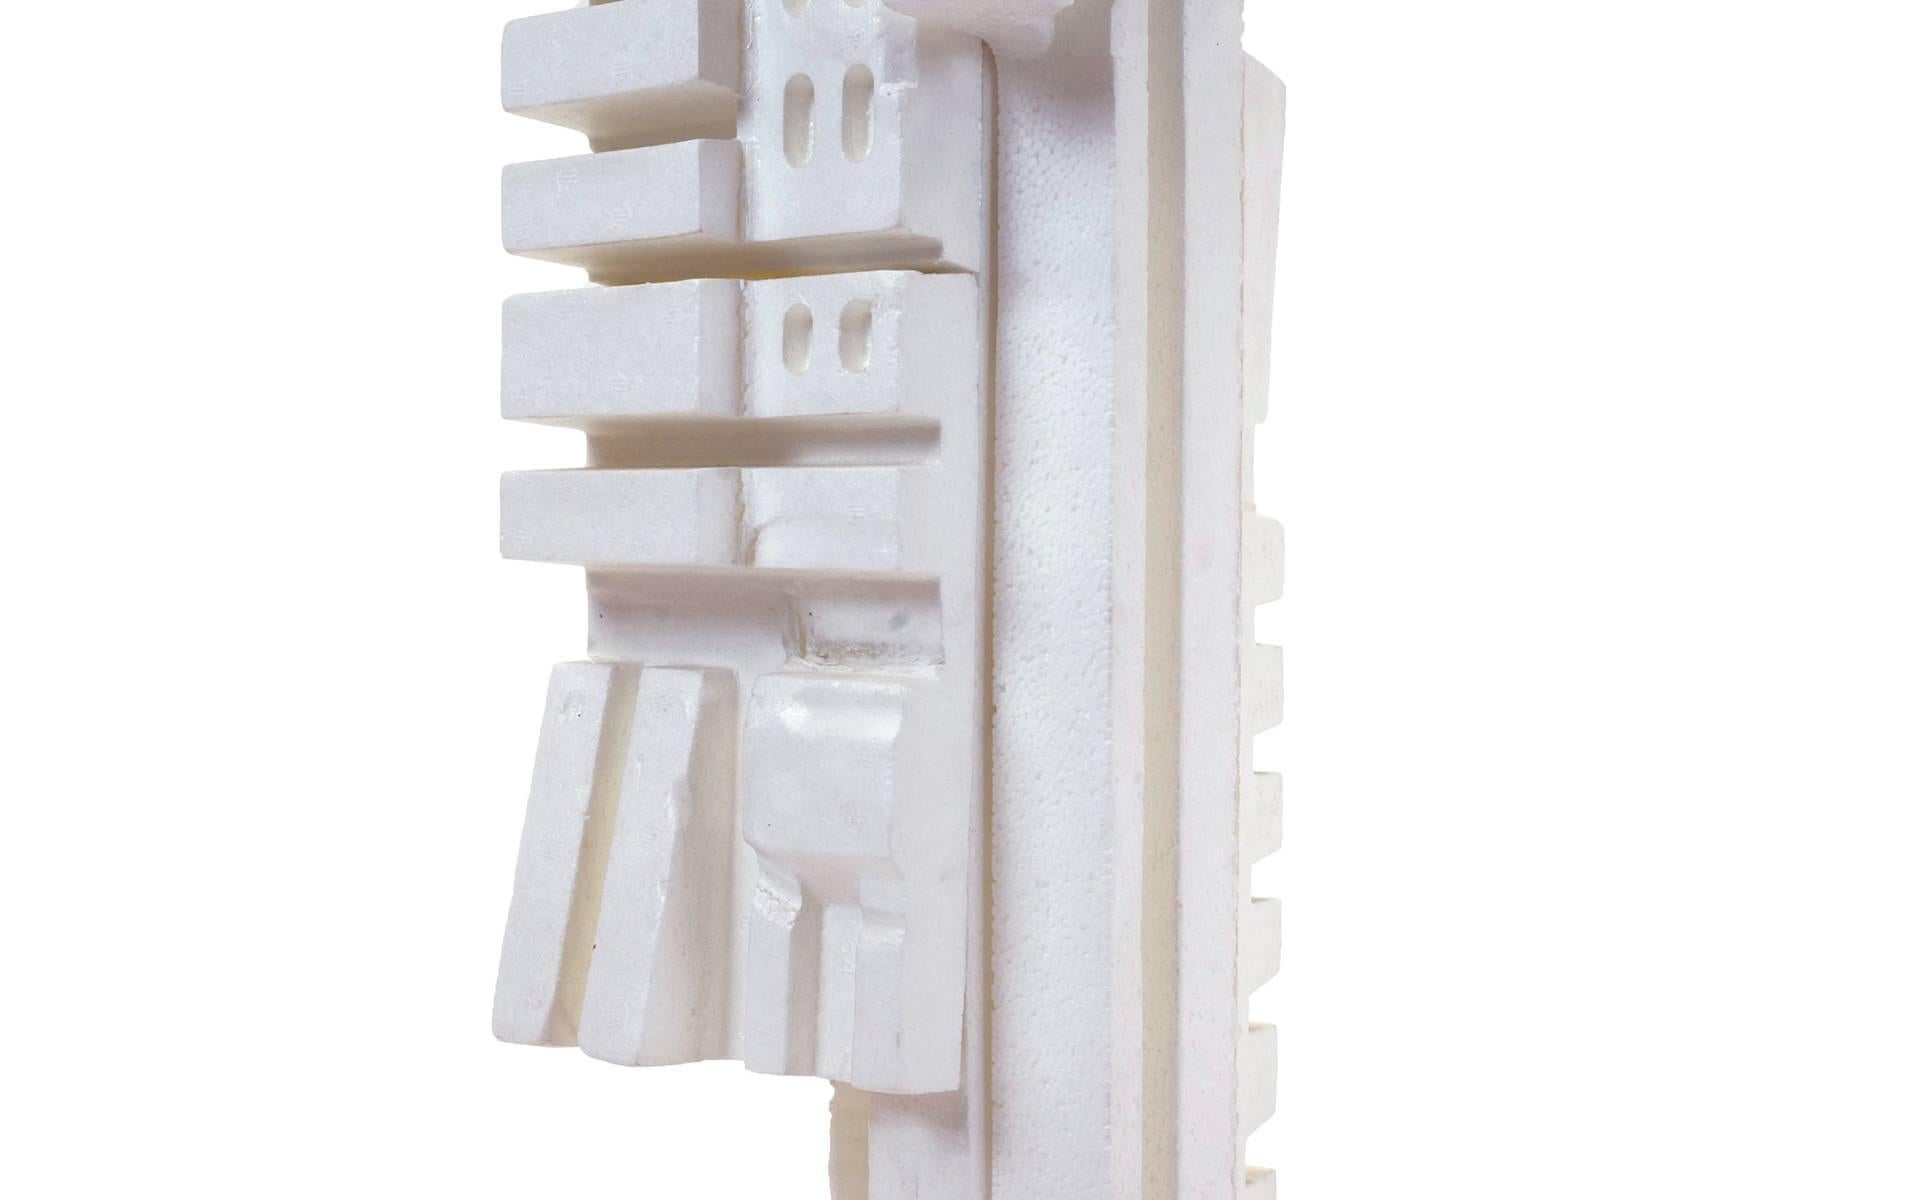 Late 20th Century Irving Harper Sculpture of Styrofoam from His Paper Sculpture Series